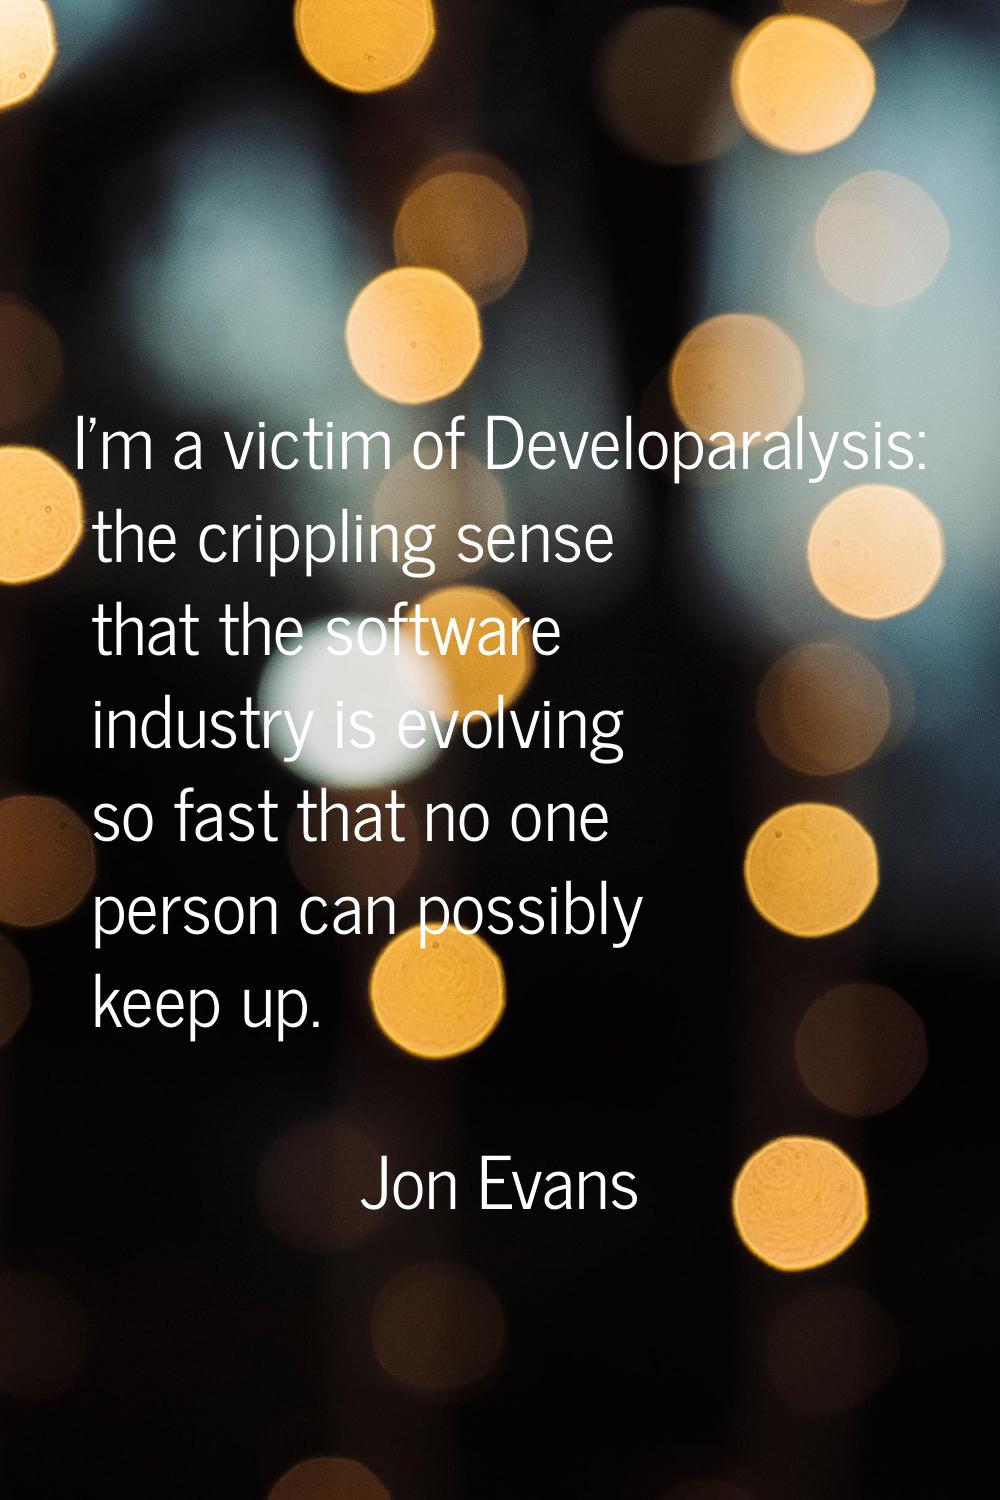 I'm a victim of Developaralysis: the crippling sense that the software industry is evolving so fast